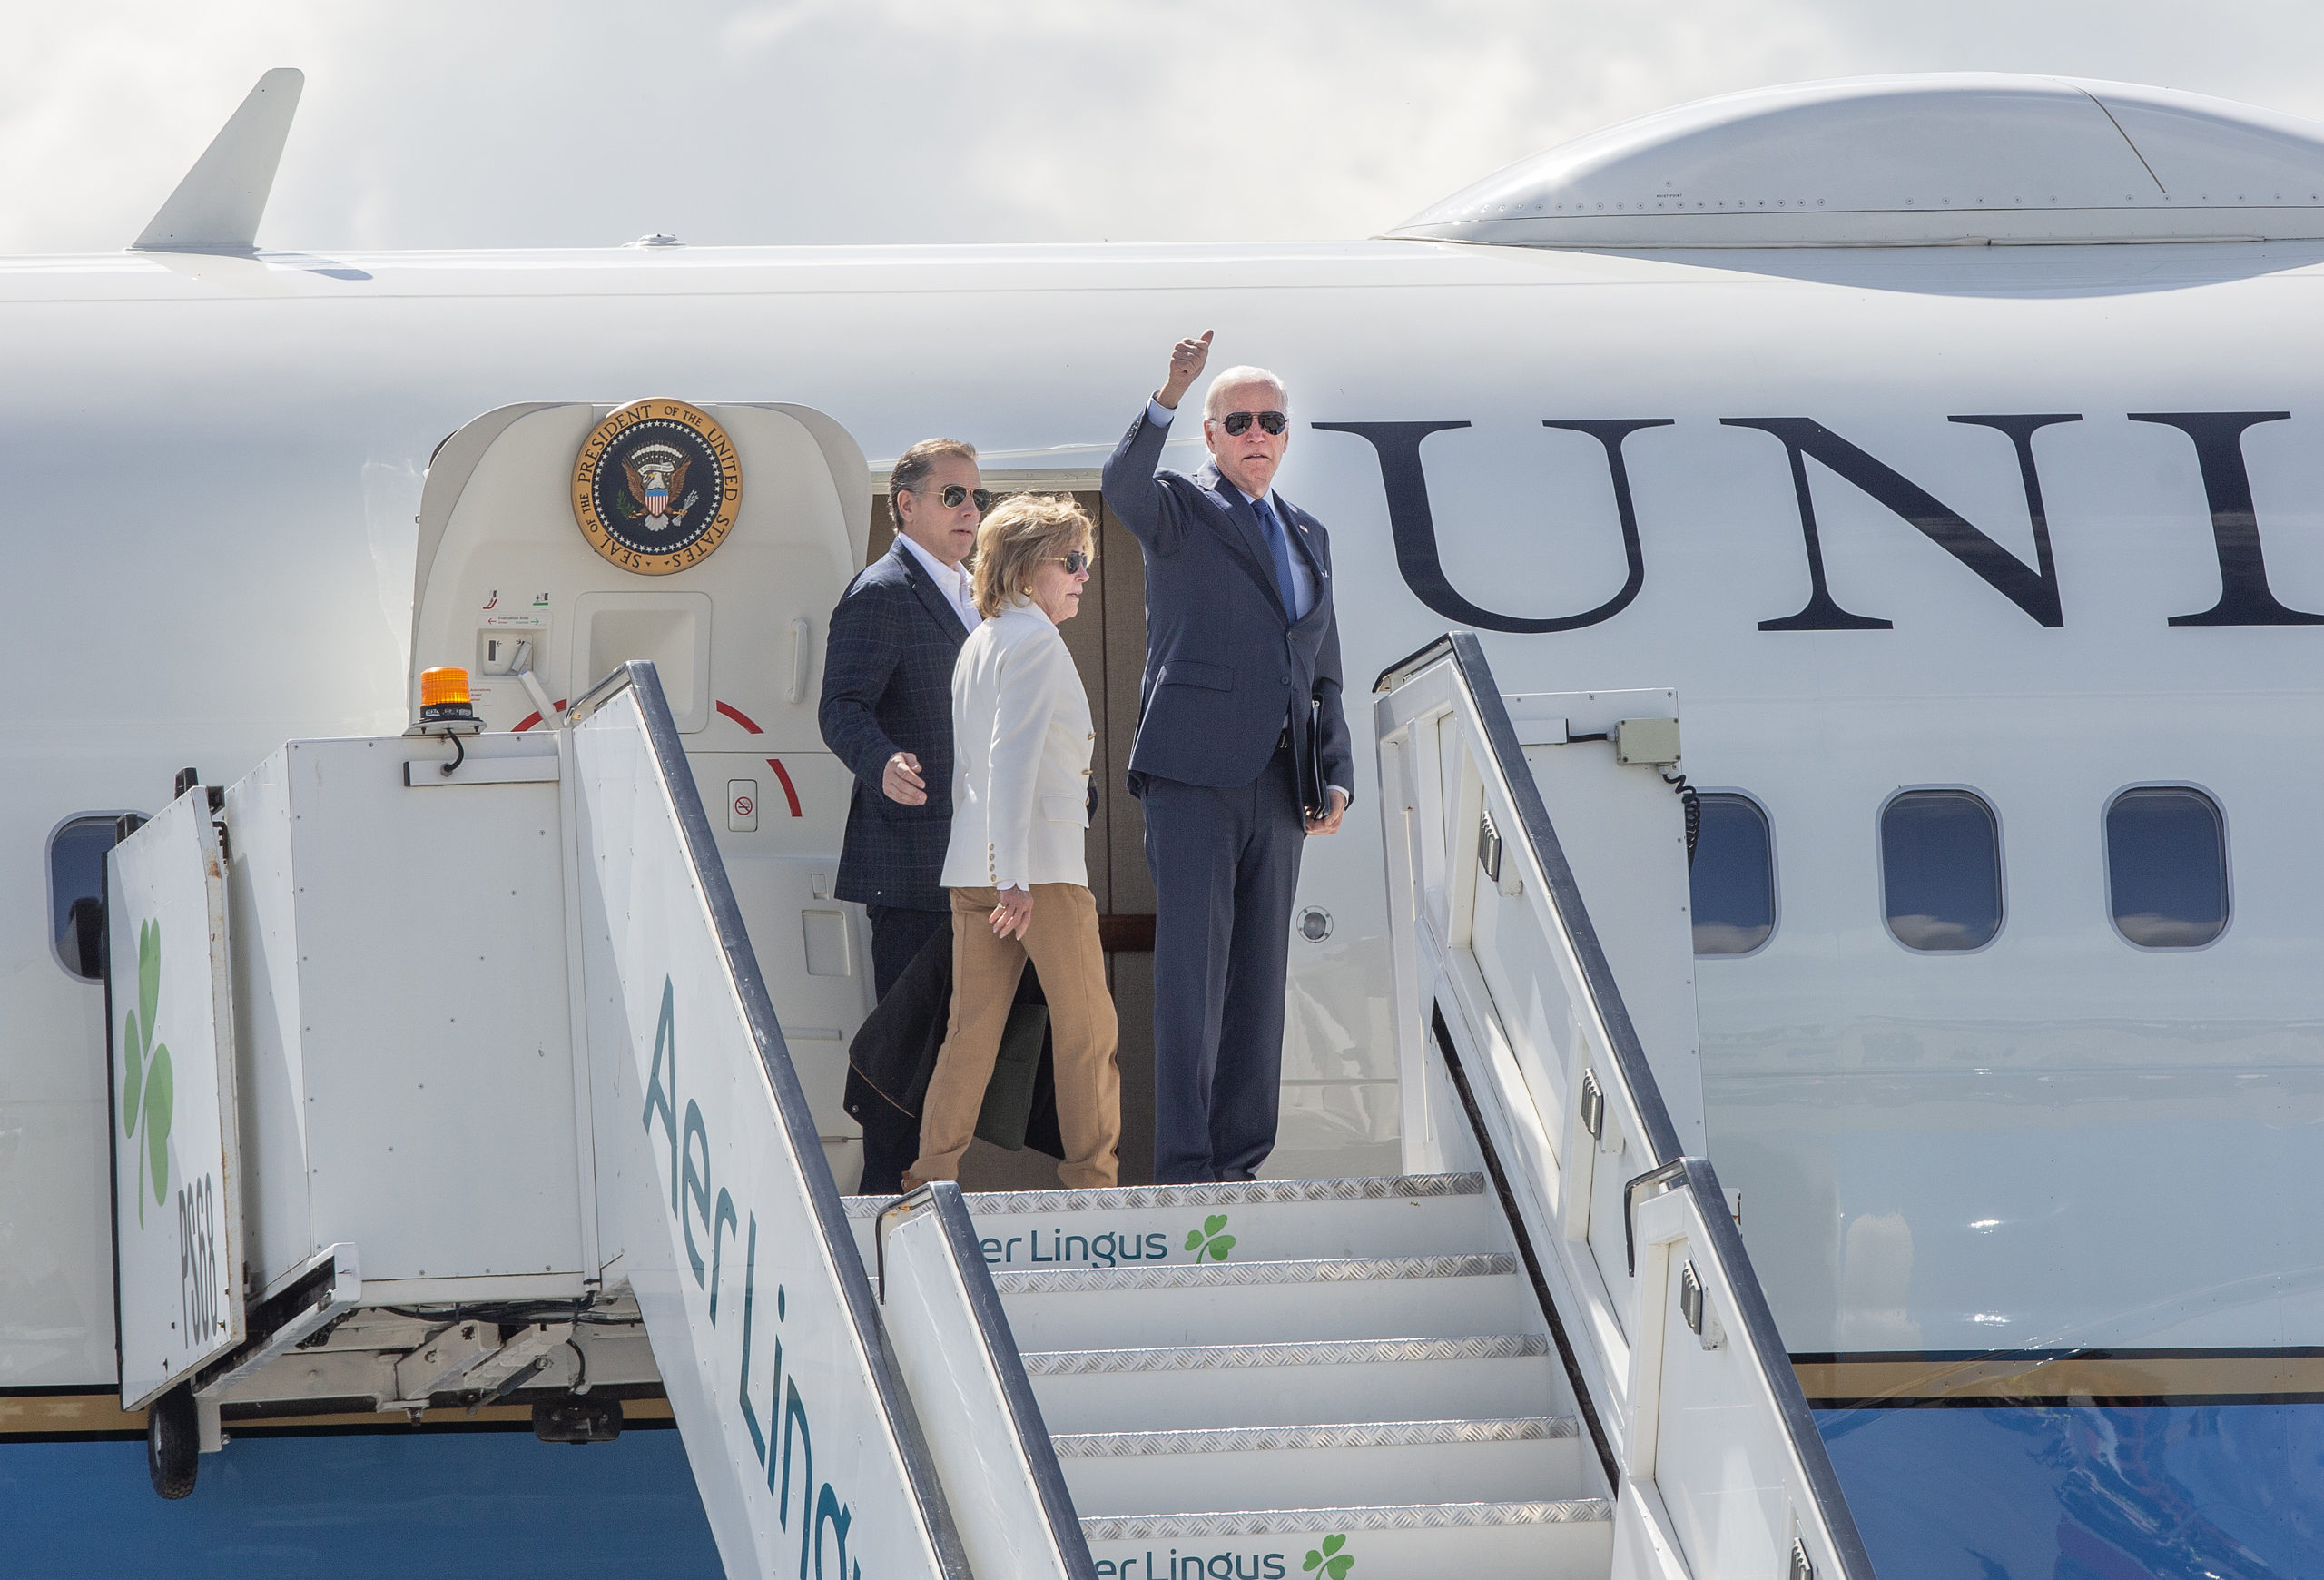  In this handout image provided by the Irish Government, US President Joe Biden departs Dublin Airport on Air Force One with his sister Valerie and son Hunter on April 14, 2023 in Dublin, Ireland. US President Joe Biden has travelled to Northern Ireland and Ireland with his sister Valerie Biden Owens and son Hunter Biden to explore his family's Irish heritage and mark the 25th Anniversary of the Good Friday Peace Agreement. (Photo by Julien Behal/Irish Government via Getty Images)